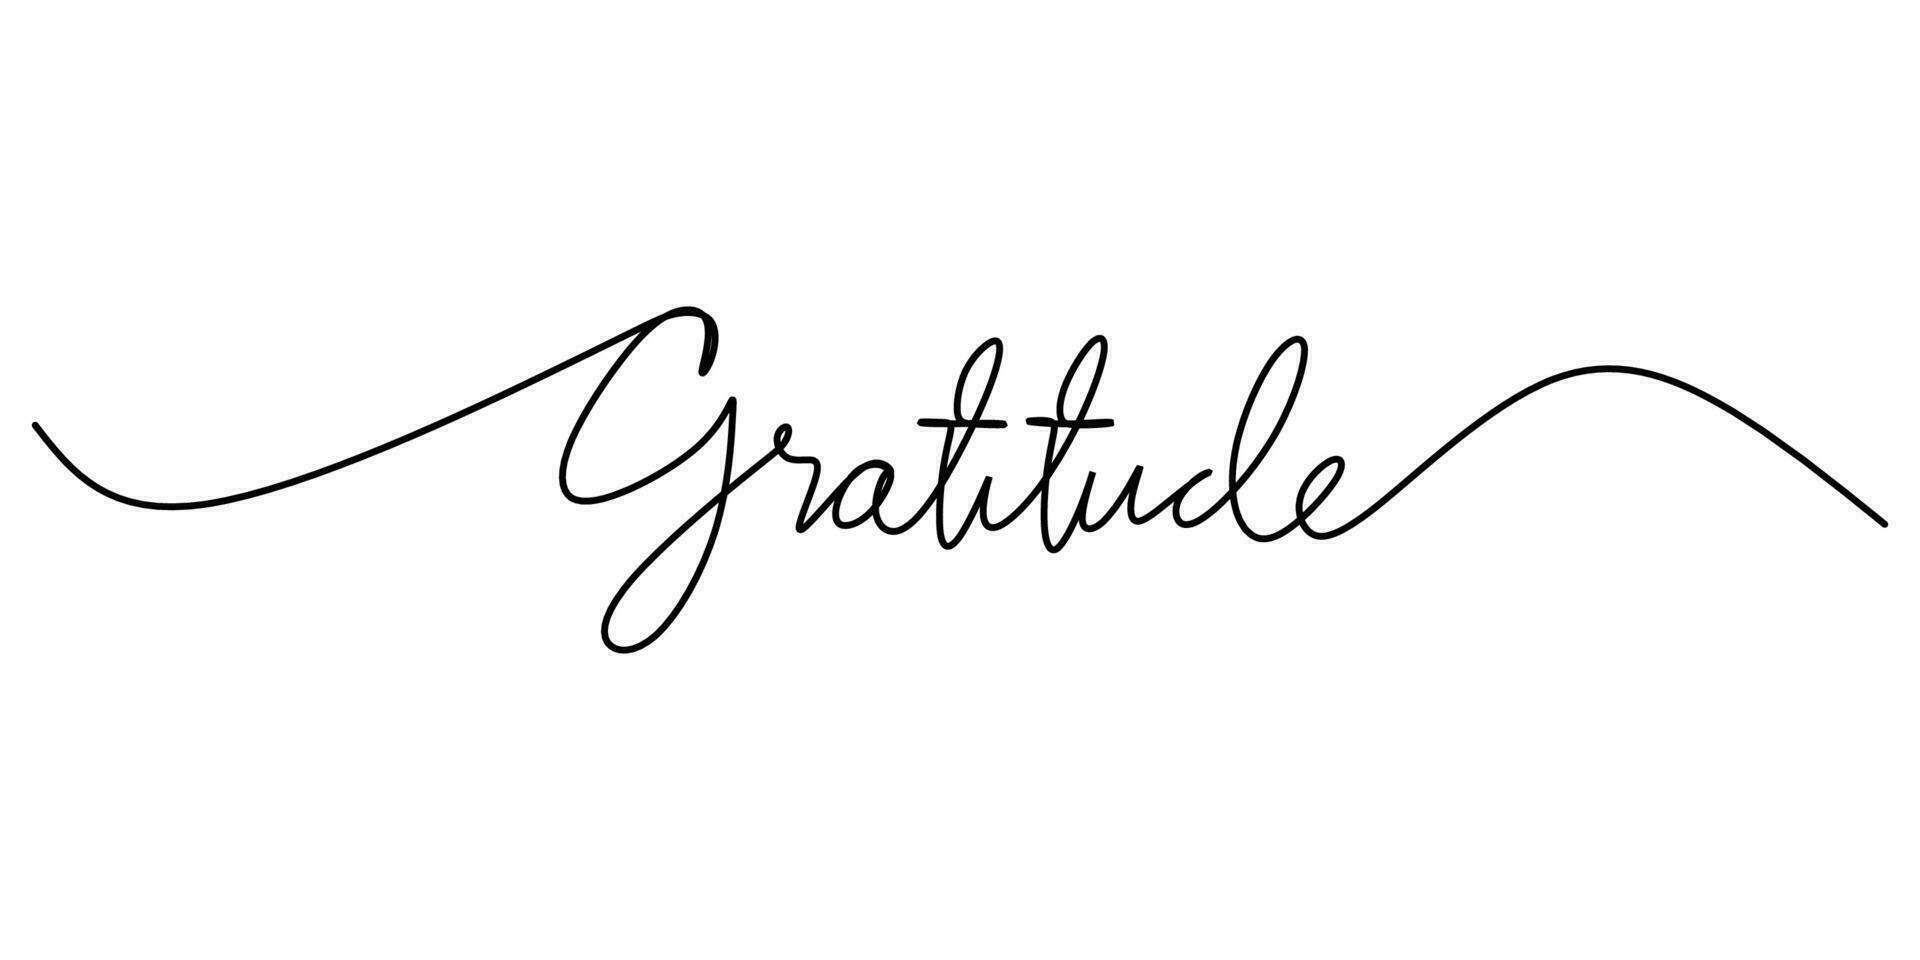 One continuous line drawing typography line art of gratitude word vector